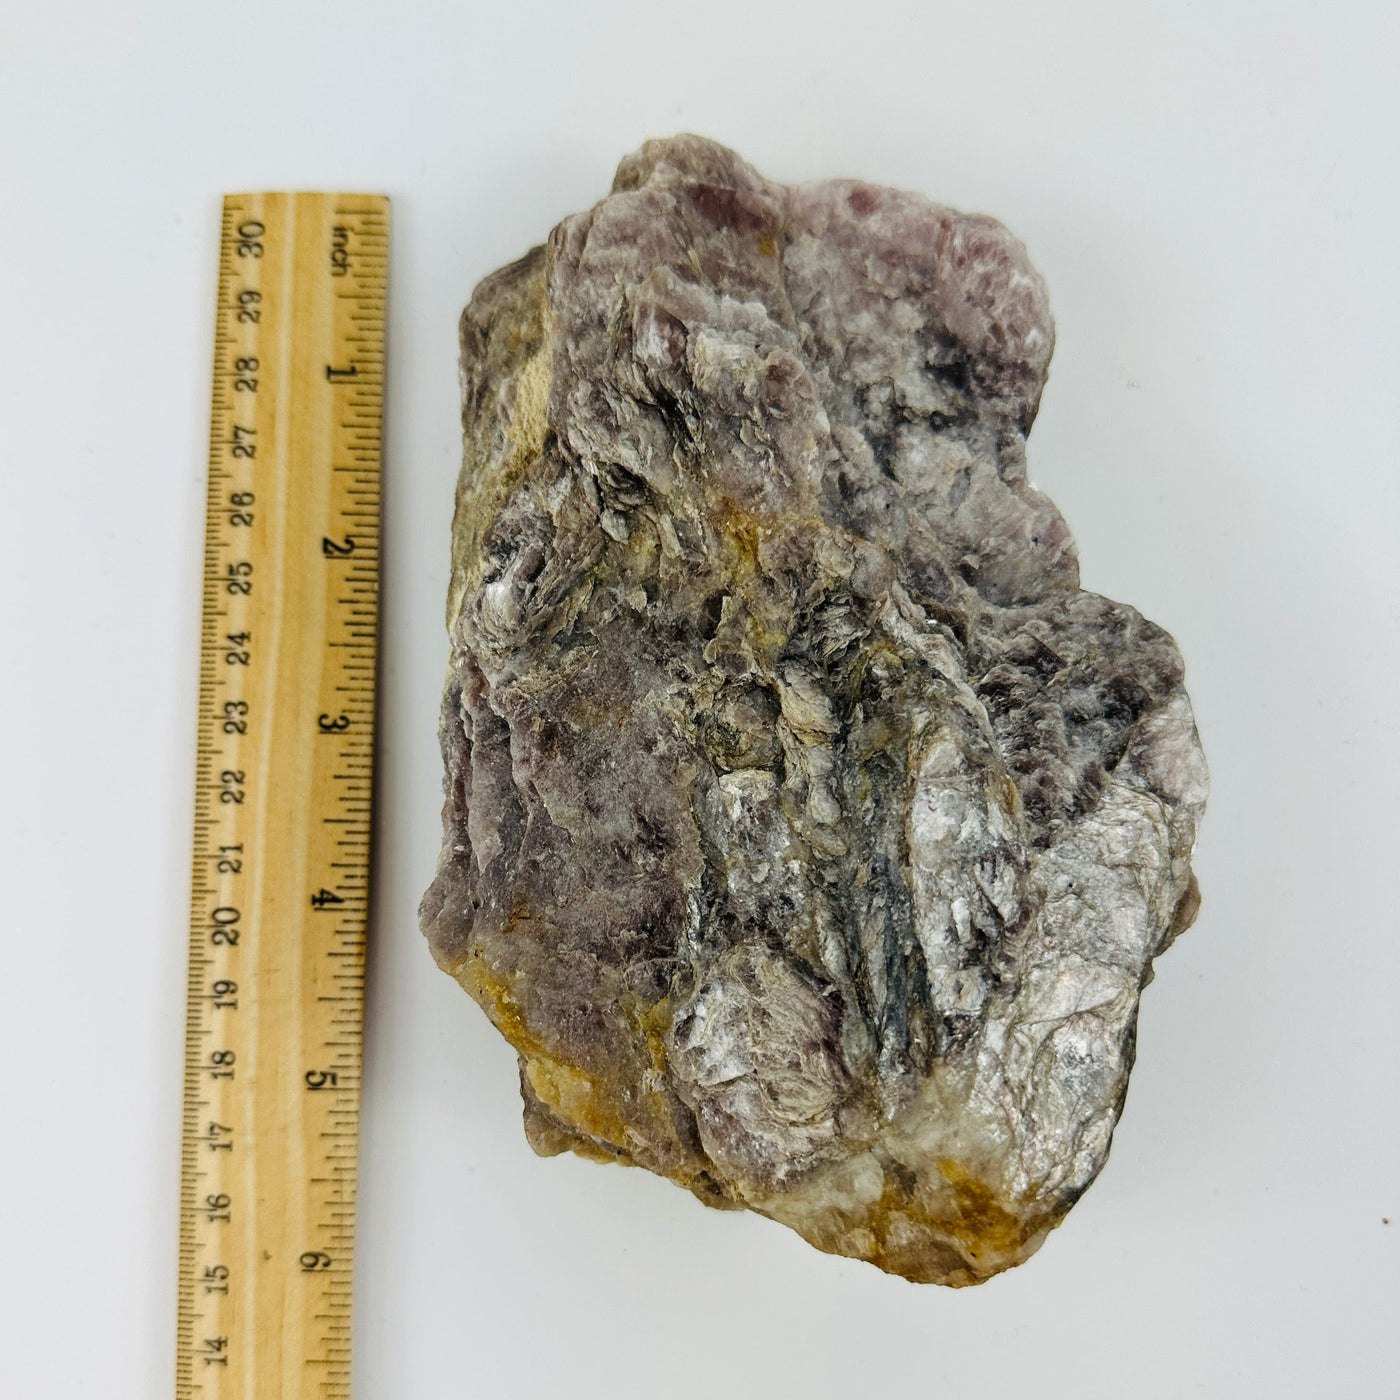 lepidolite mica next to a ruler for size reference